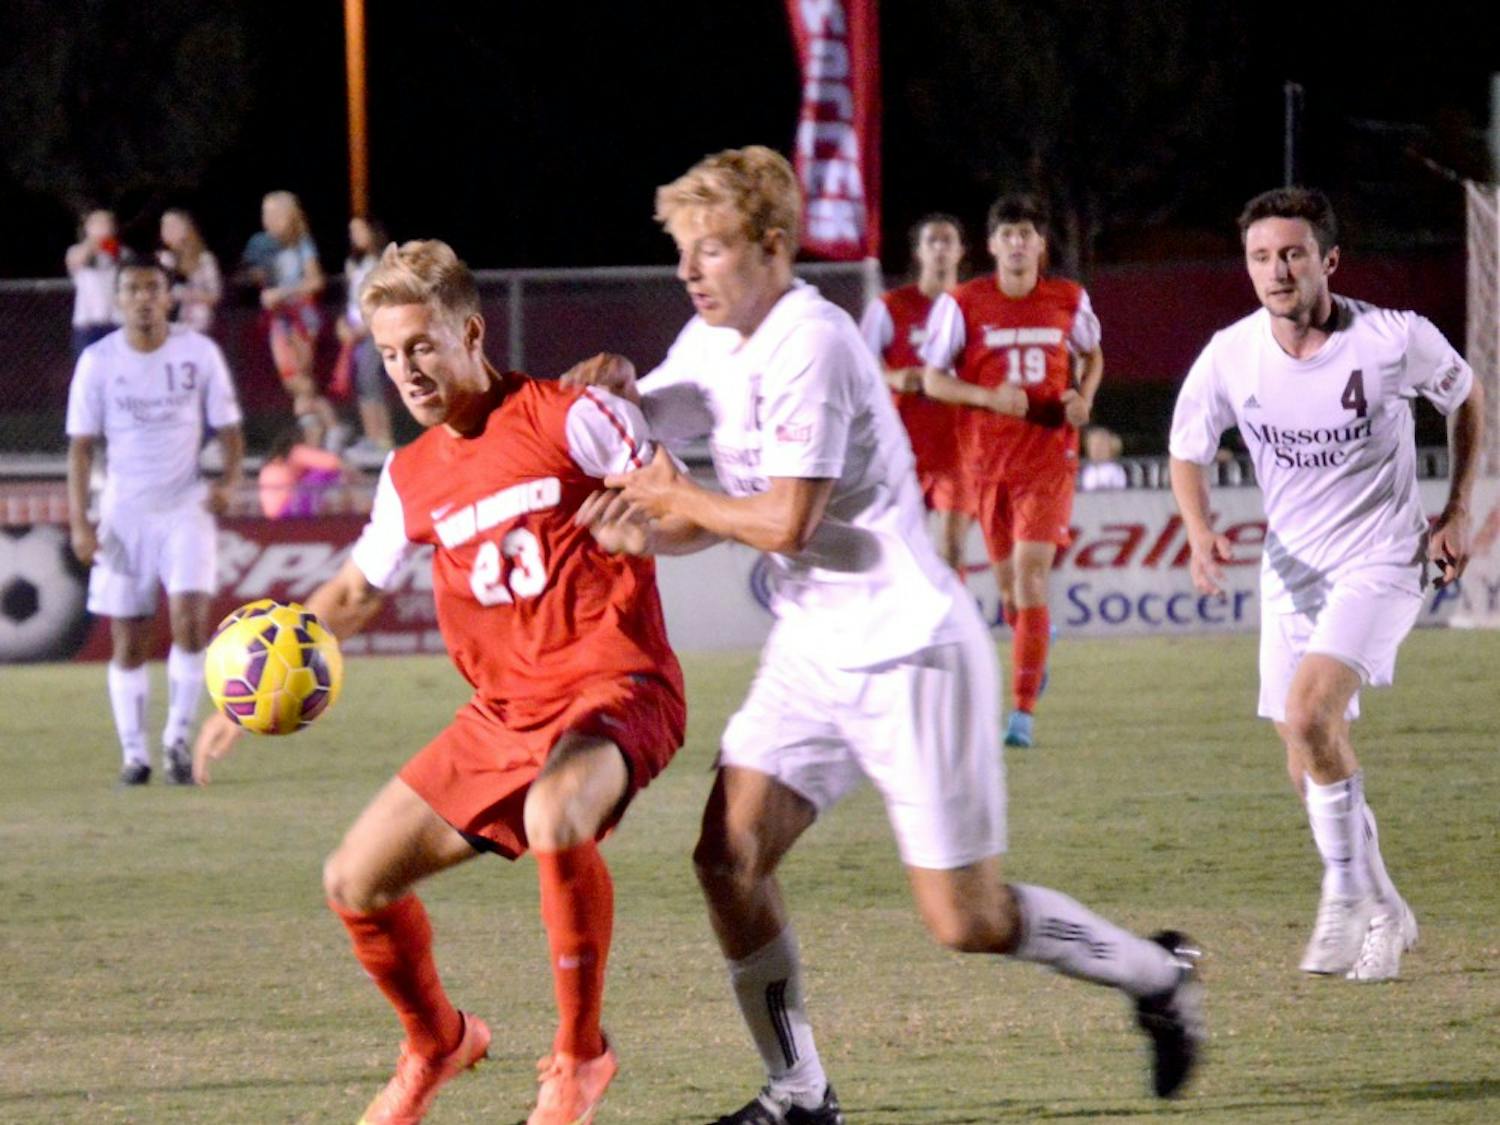 UNM forward Sam Gleadle defends the ball from an MSU player Friday night at the soccer complex. The Lobos beat the Bears 1-0 and play American University this Sunday at 6 p.m..